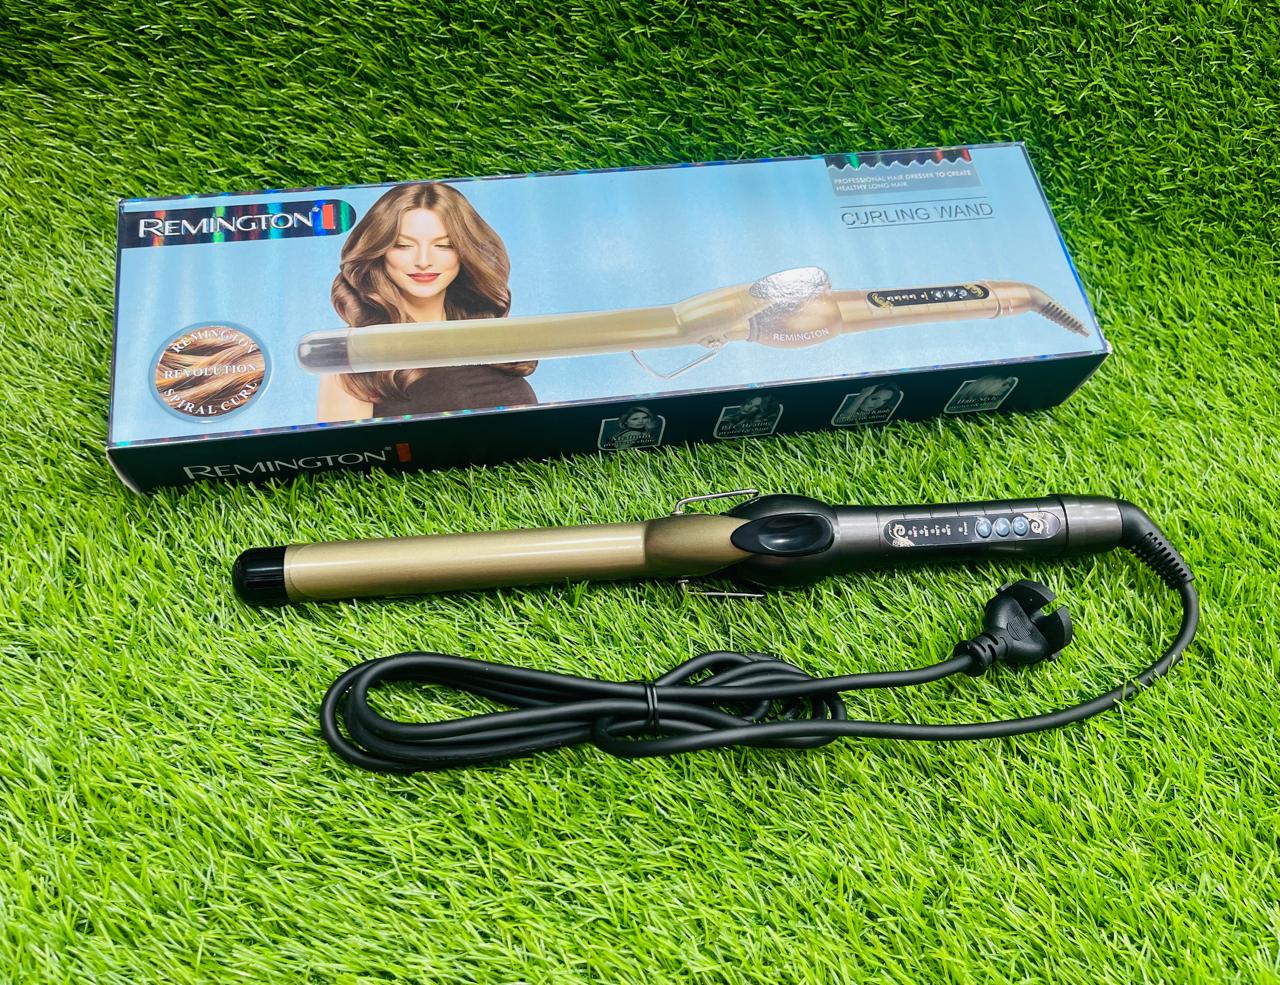 REMINGTON PRO SPIRAL CURL 750F BULLET STYLE RM8810